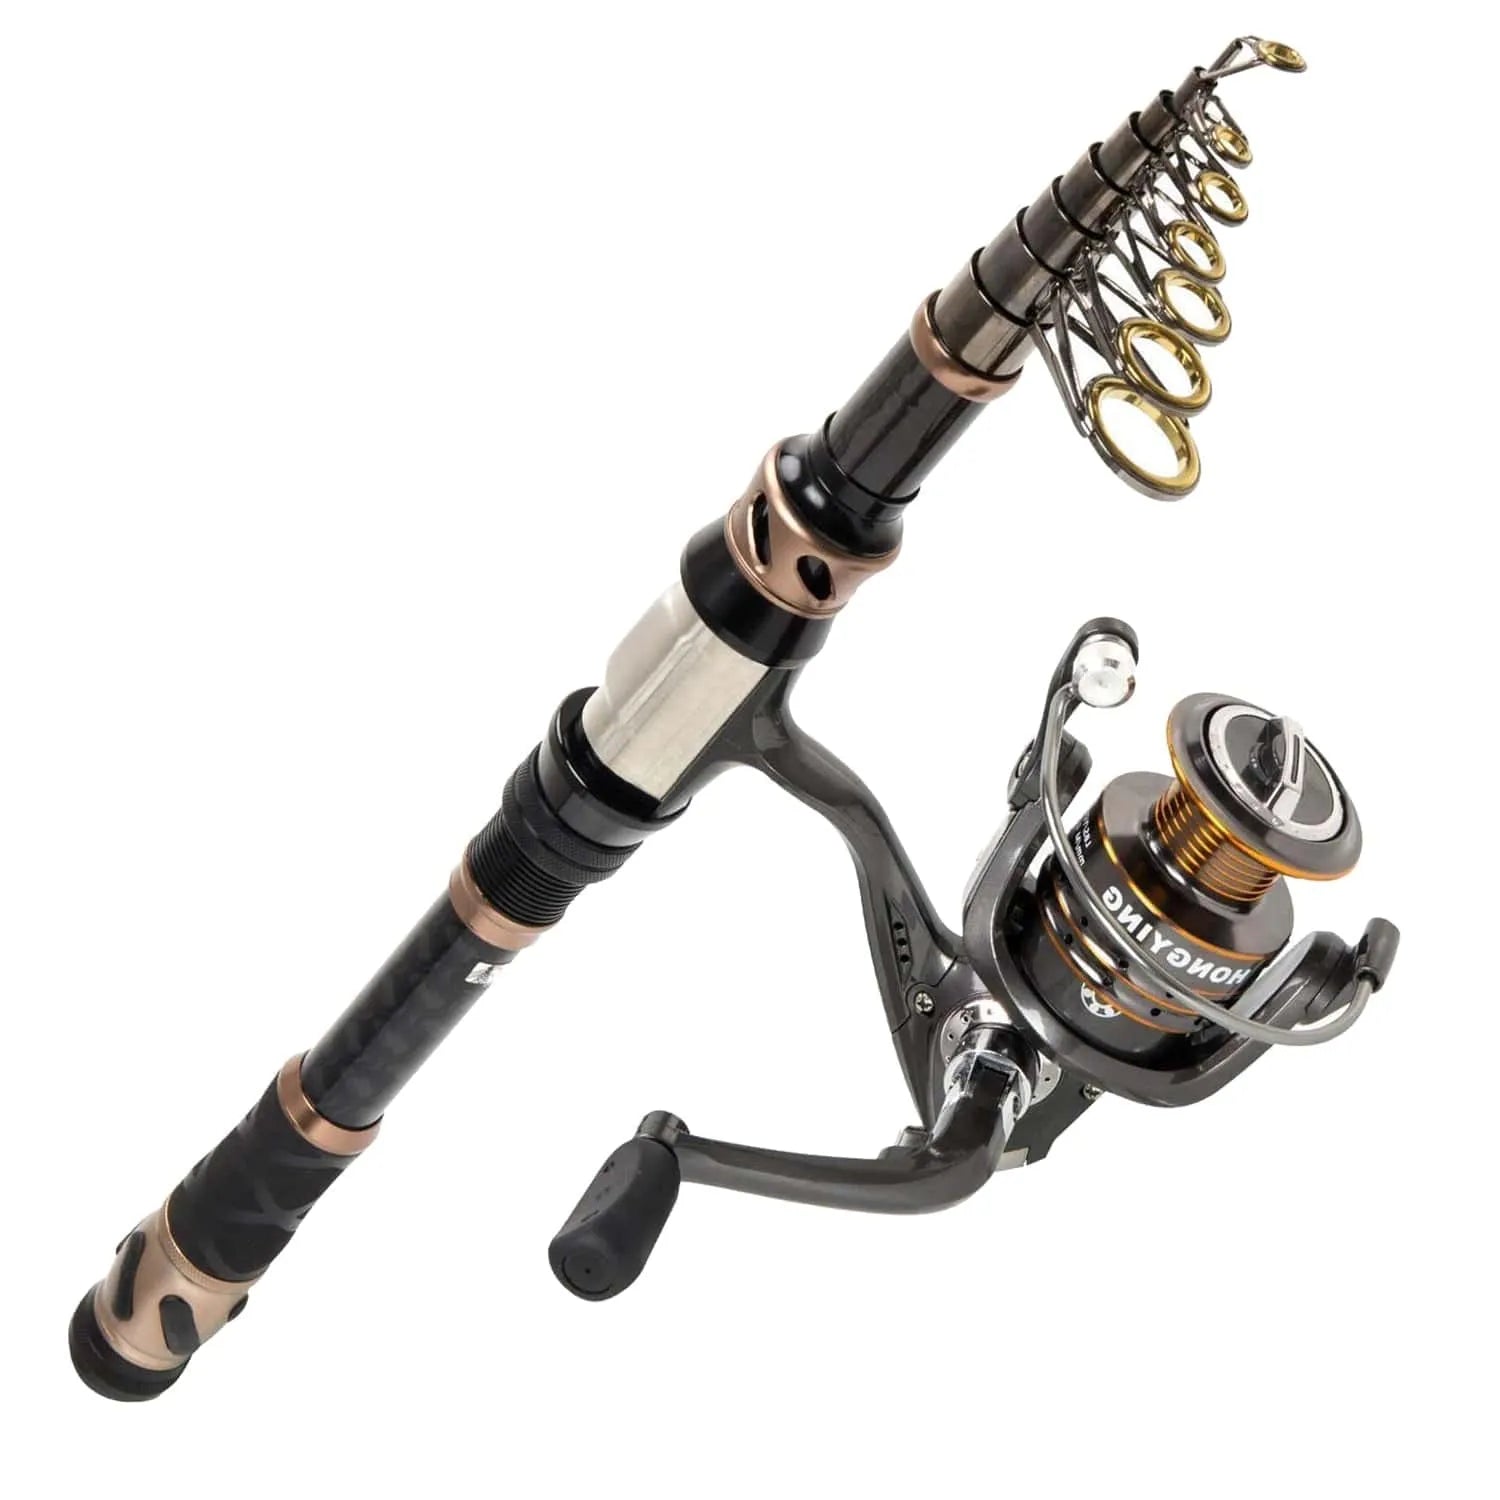 Fishing Pole 2.1m/6.89ft Collapsible Rods Carbon Fiber Telescopic Fishing  Rods